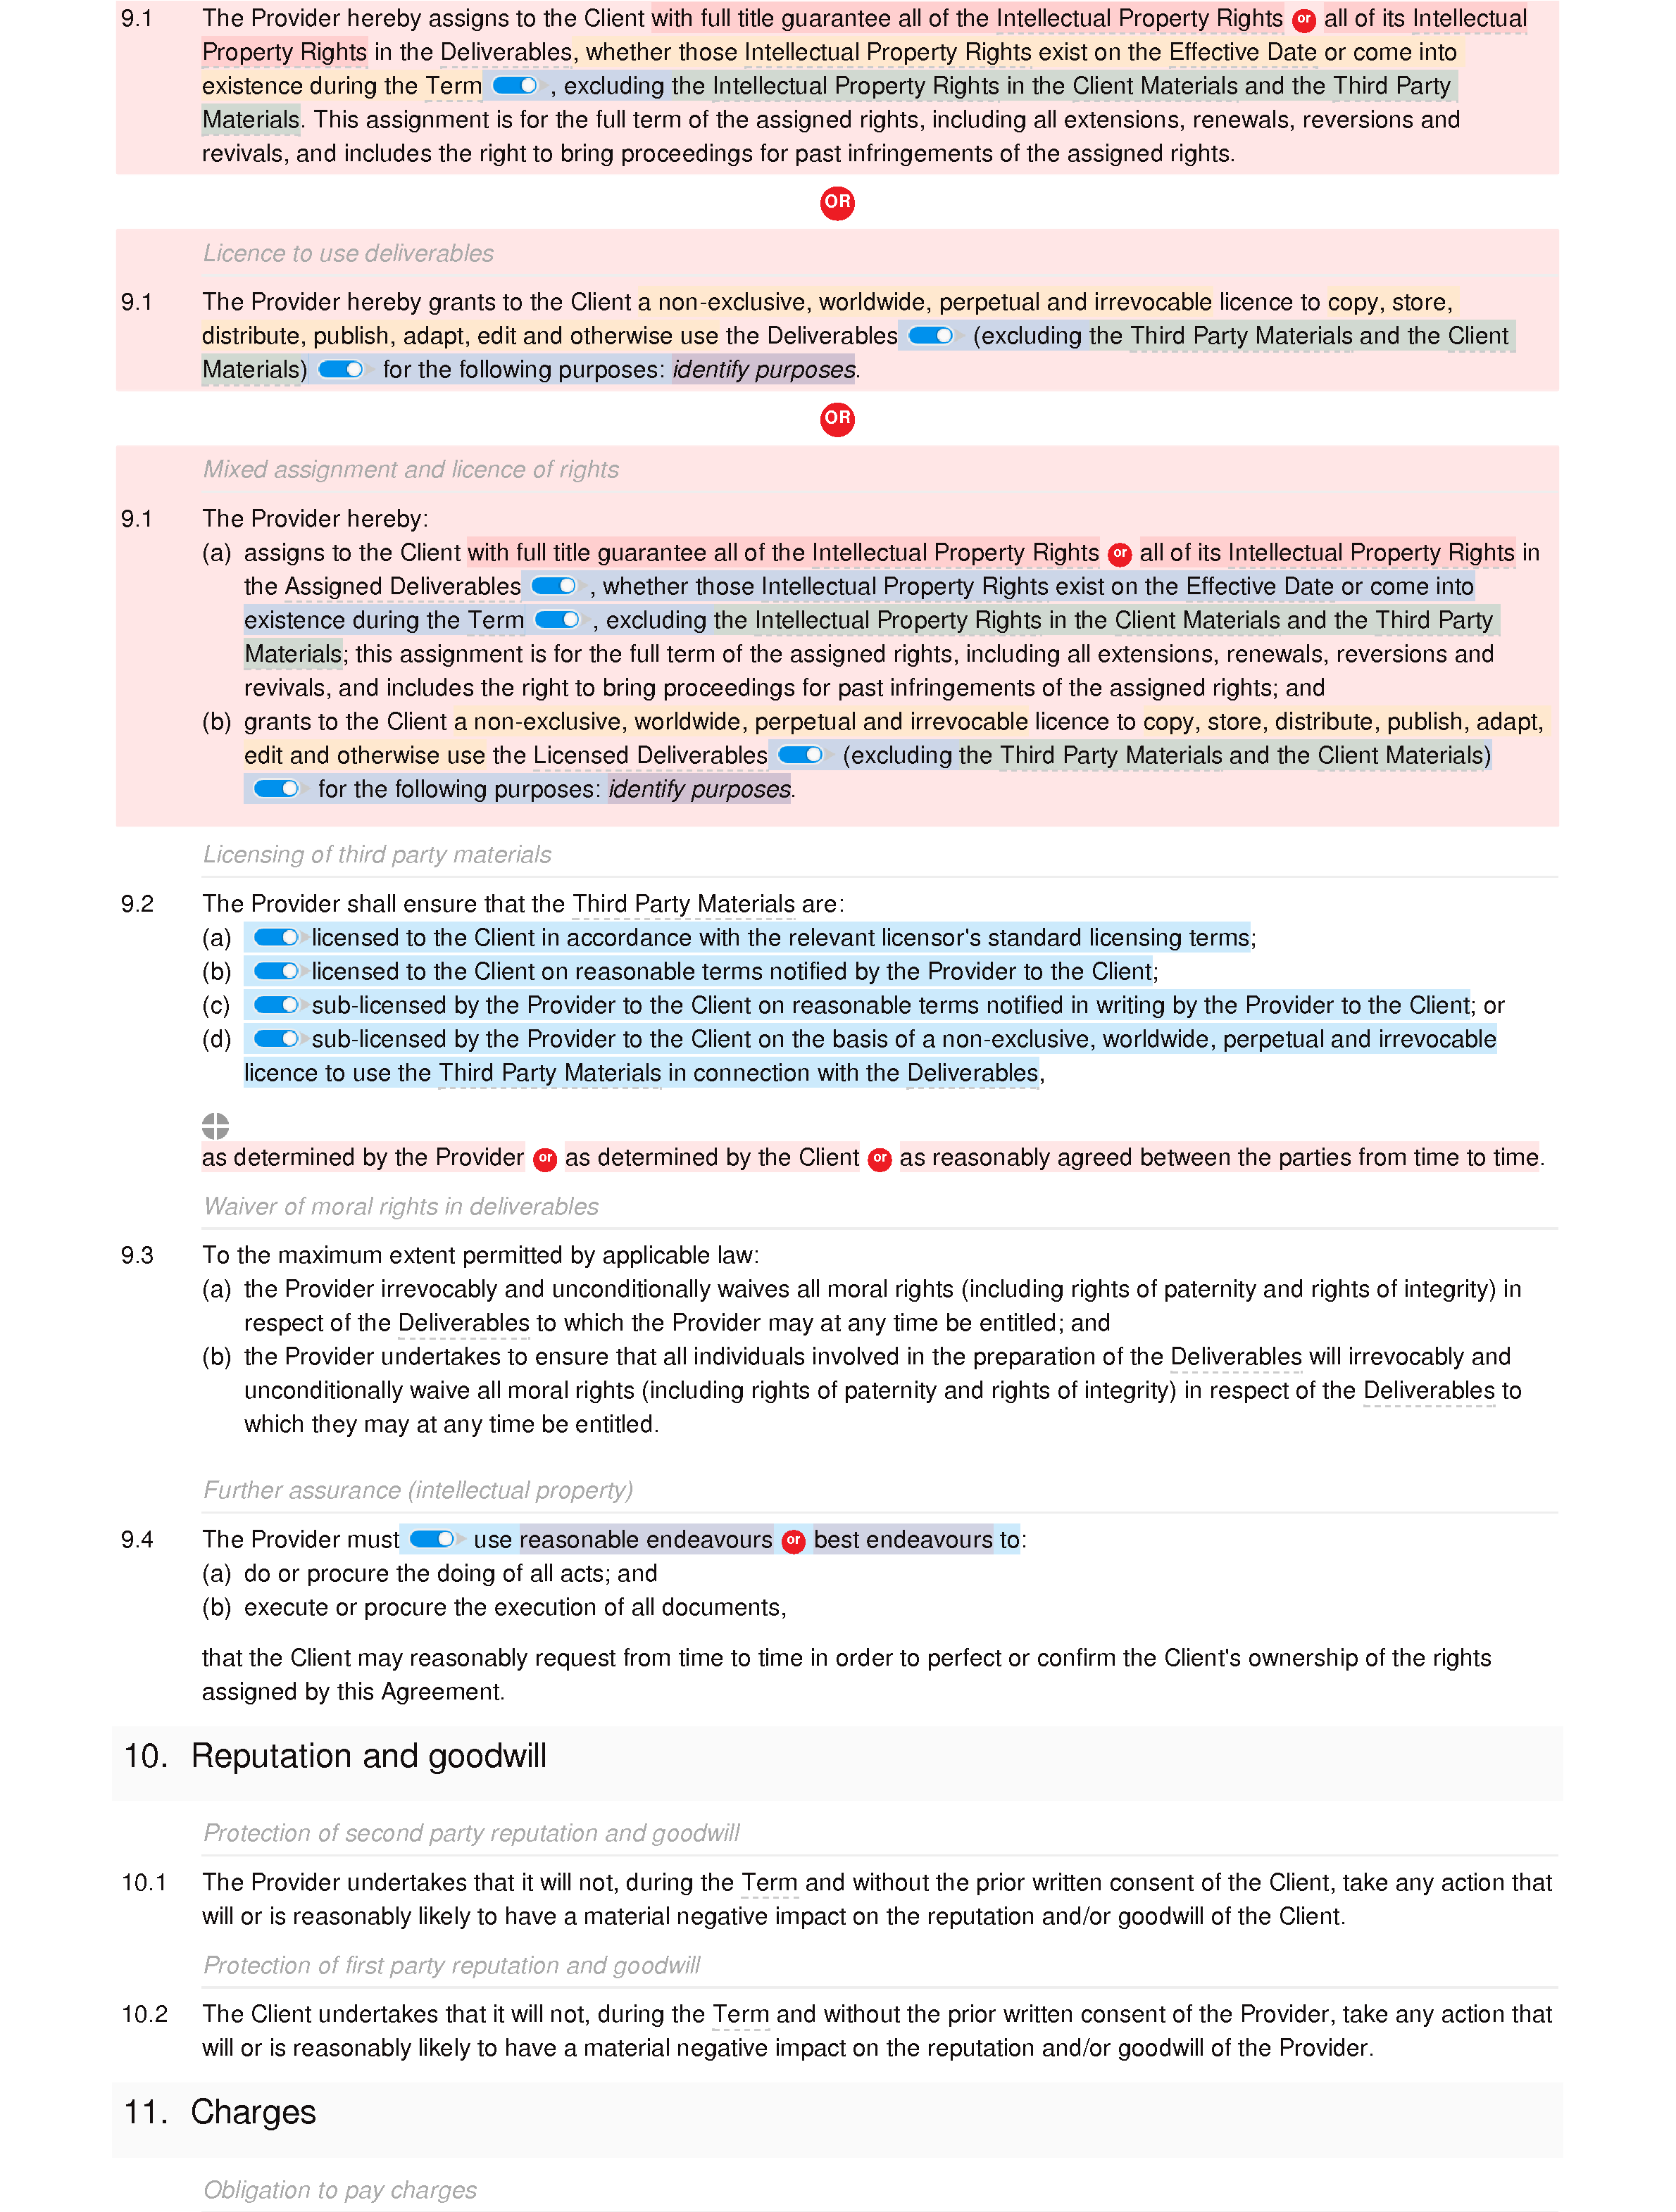 SEO agreement document editor preview